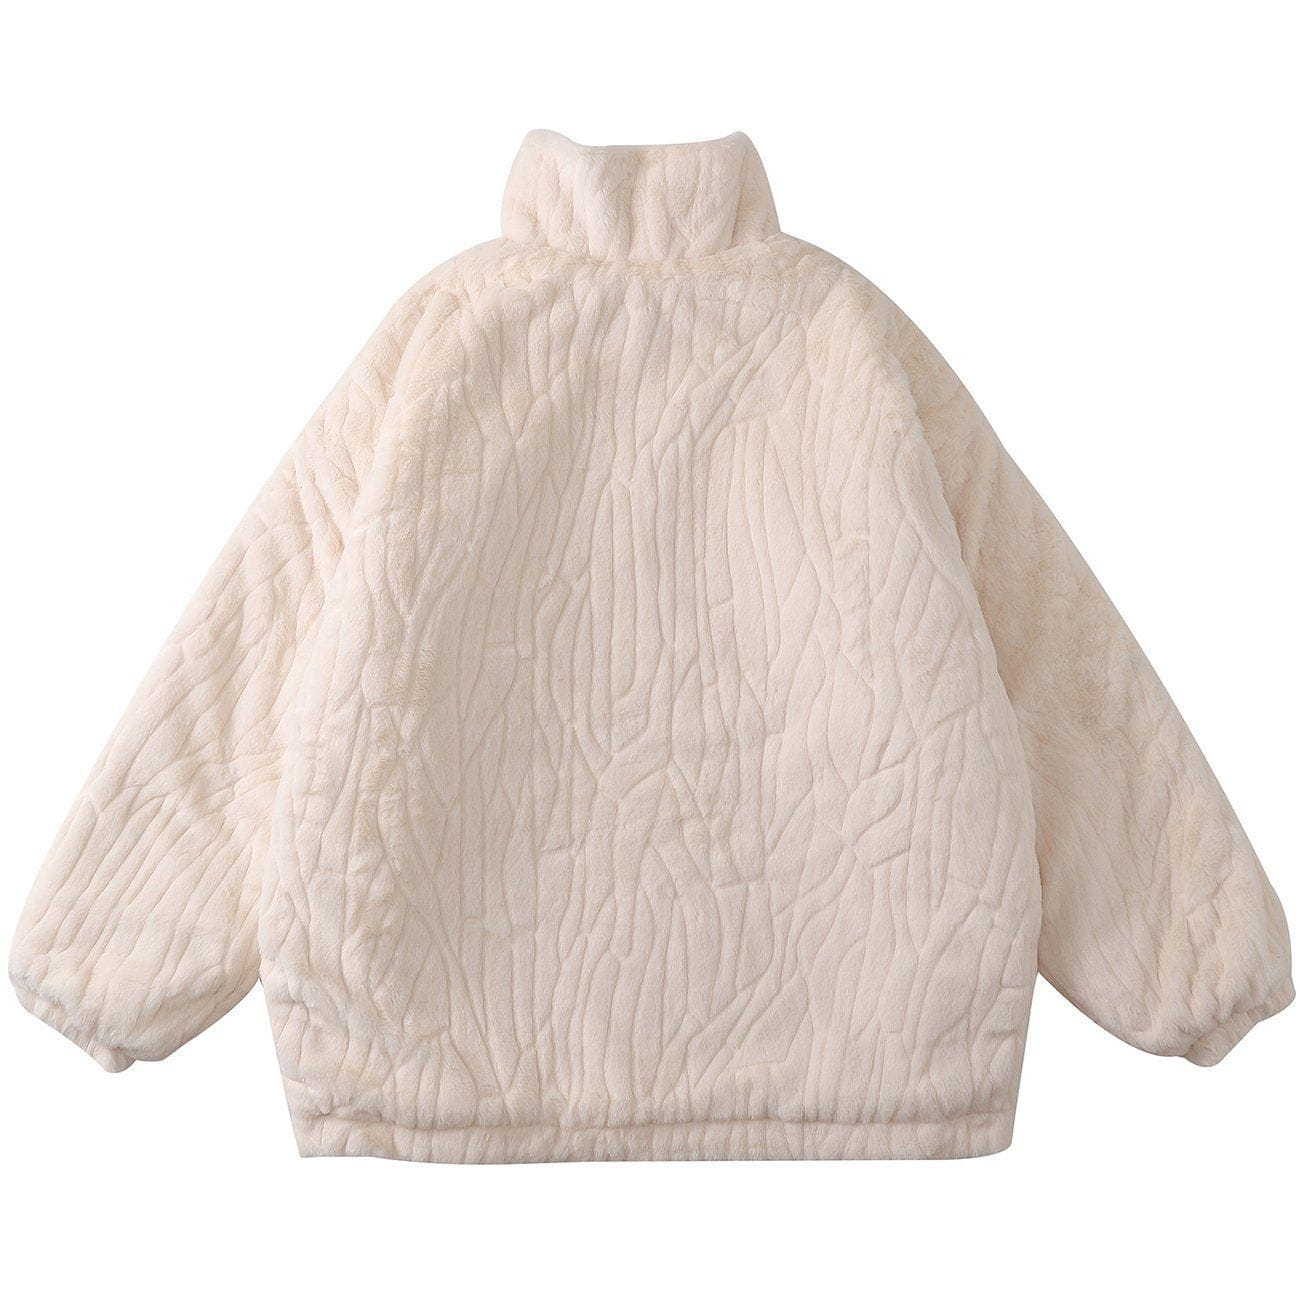 Sneakerland™ - Texture Printing Solid Color Plush Winter Coat